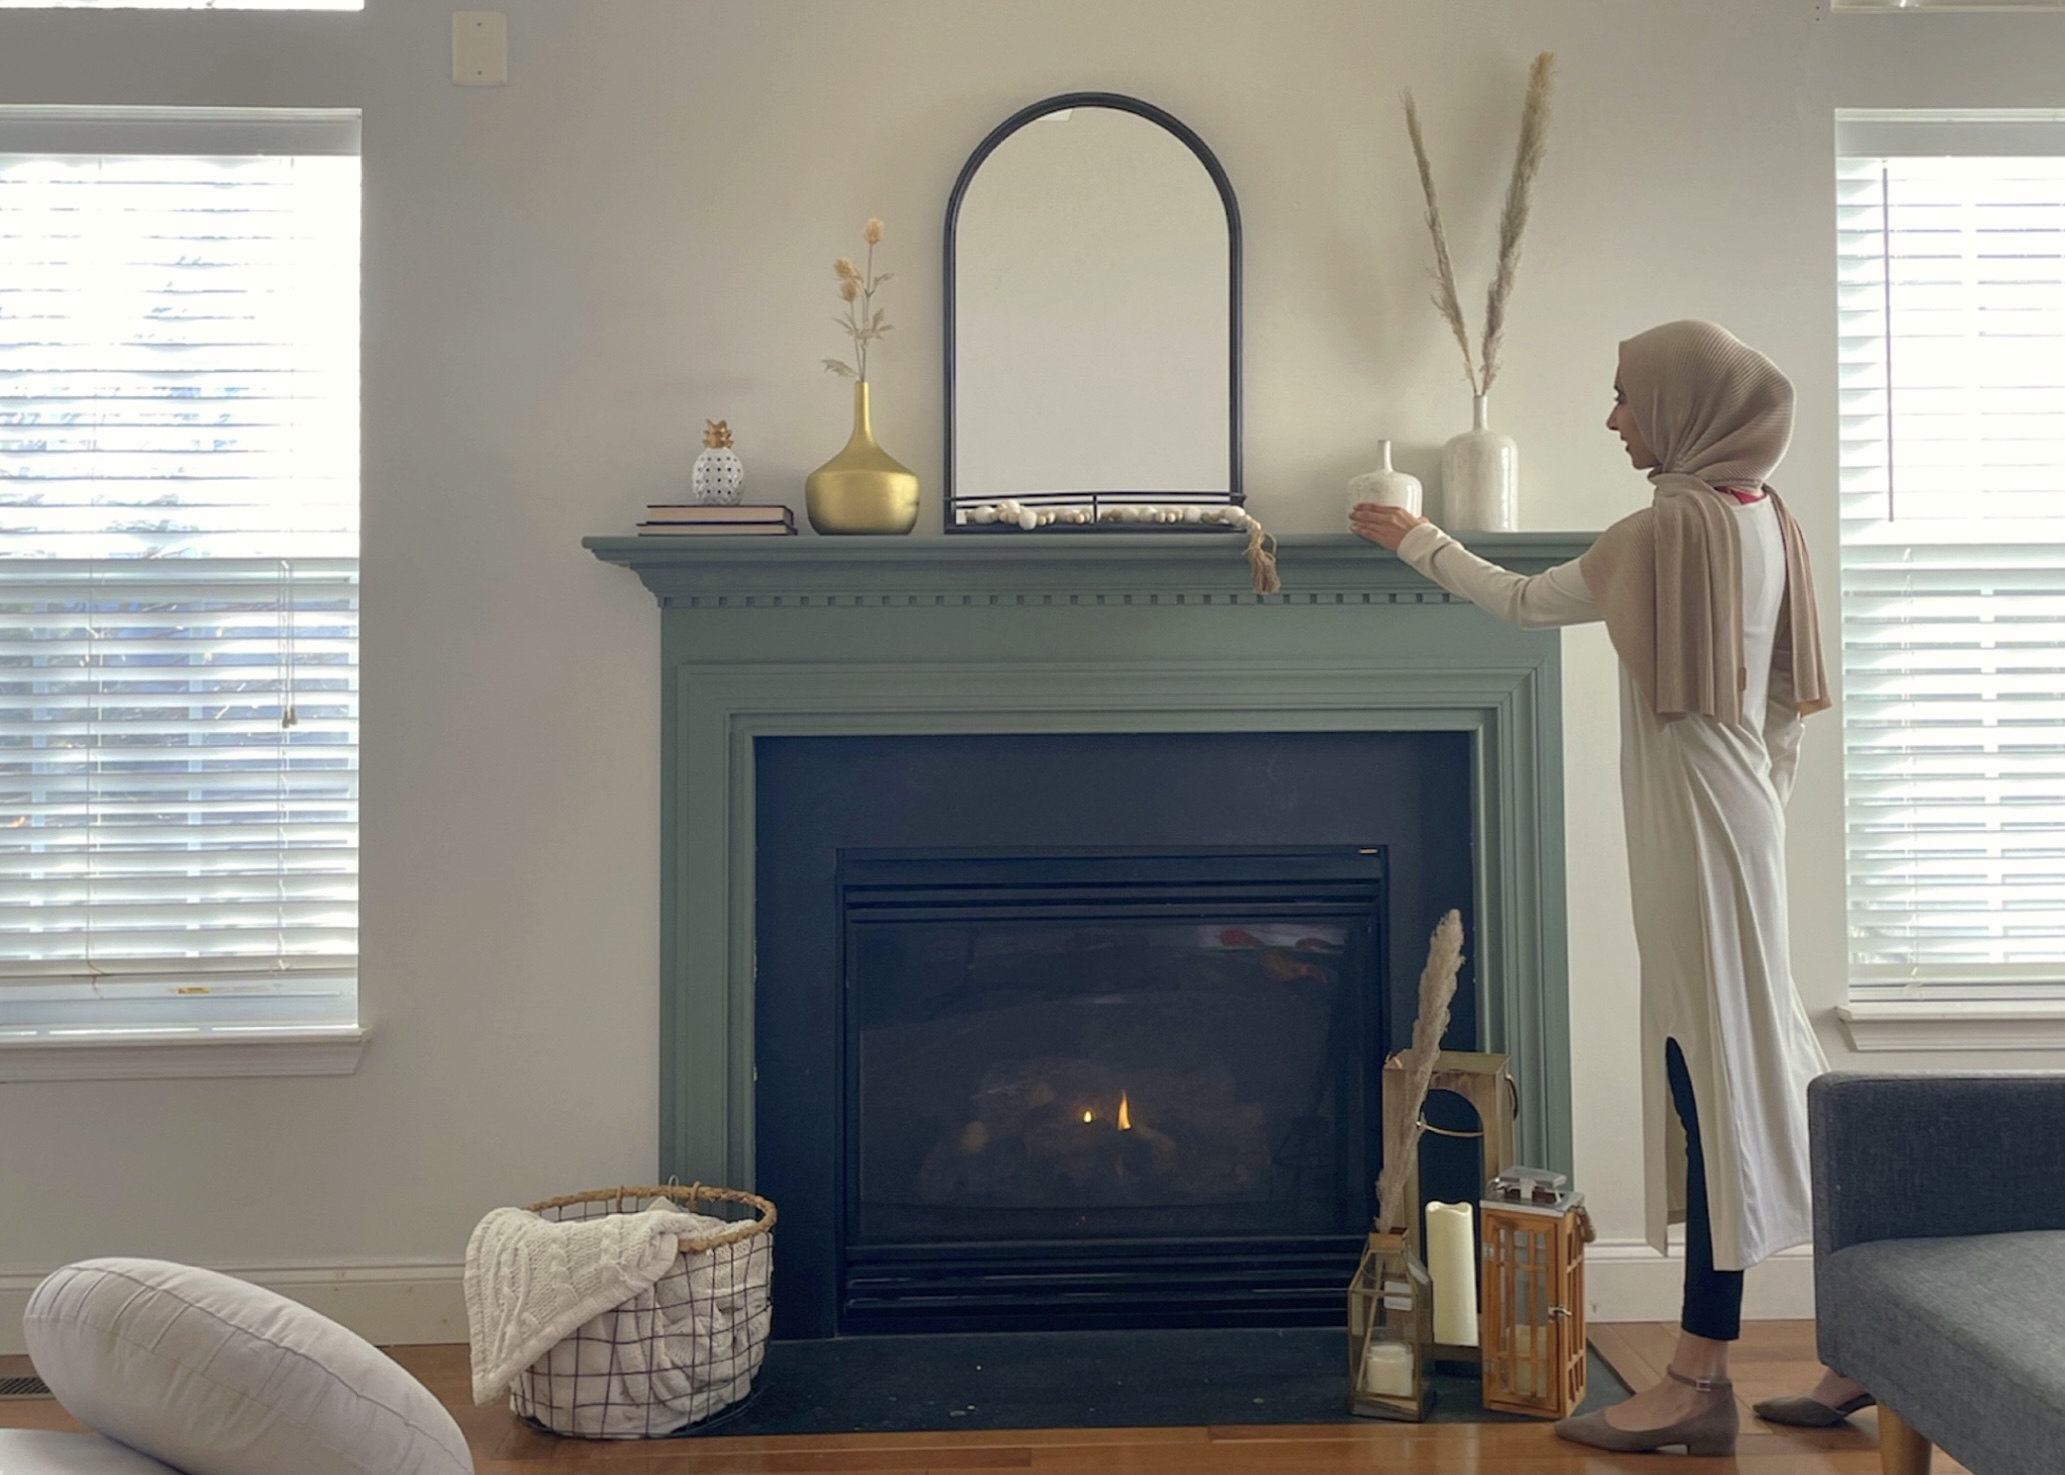 Fireplace Refresh Feat HGTV® Home by Sherwin-Williams 2022 Color Collection of the Year